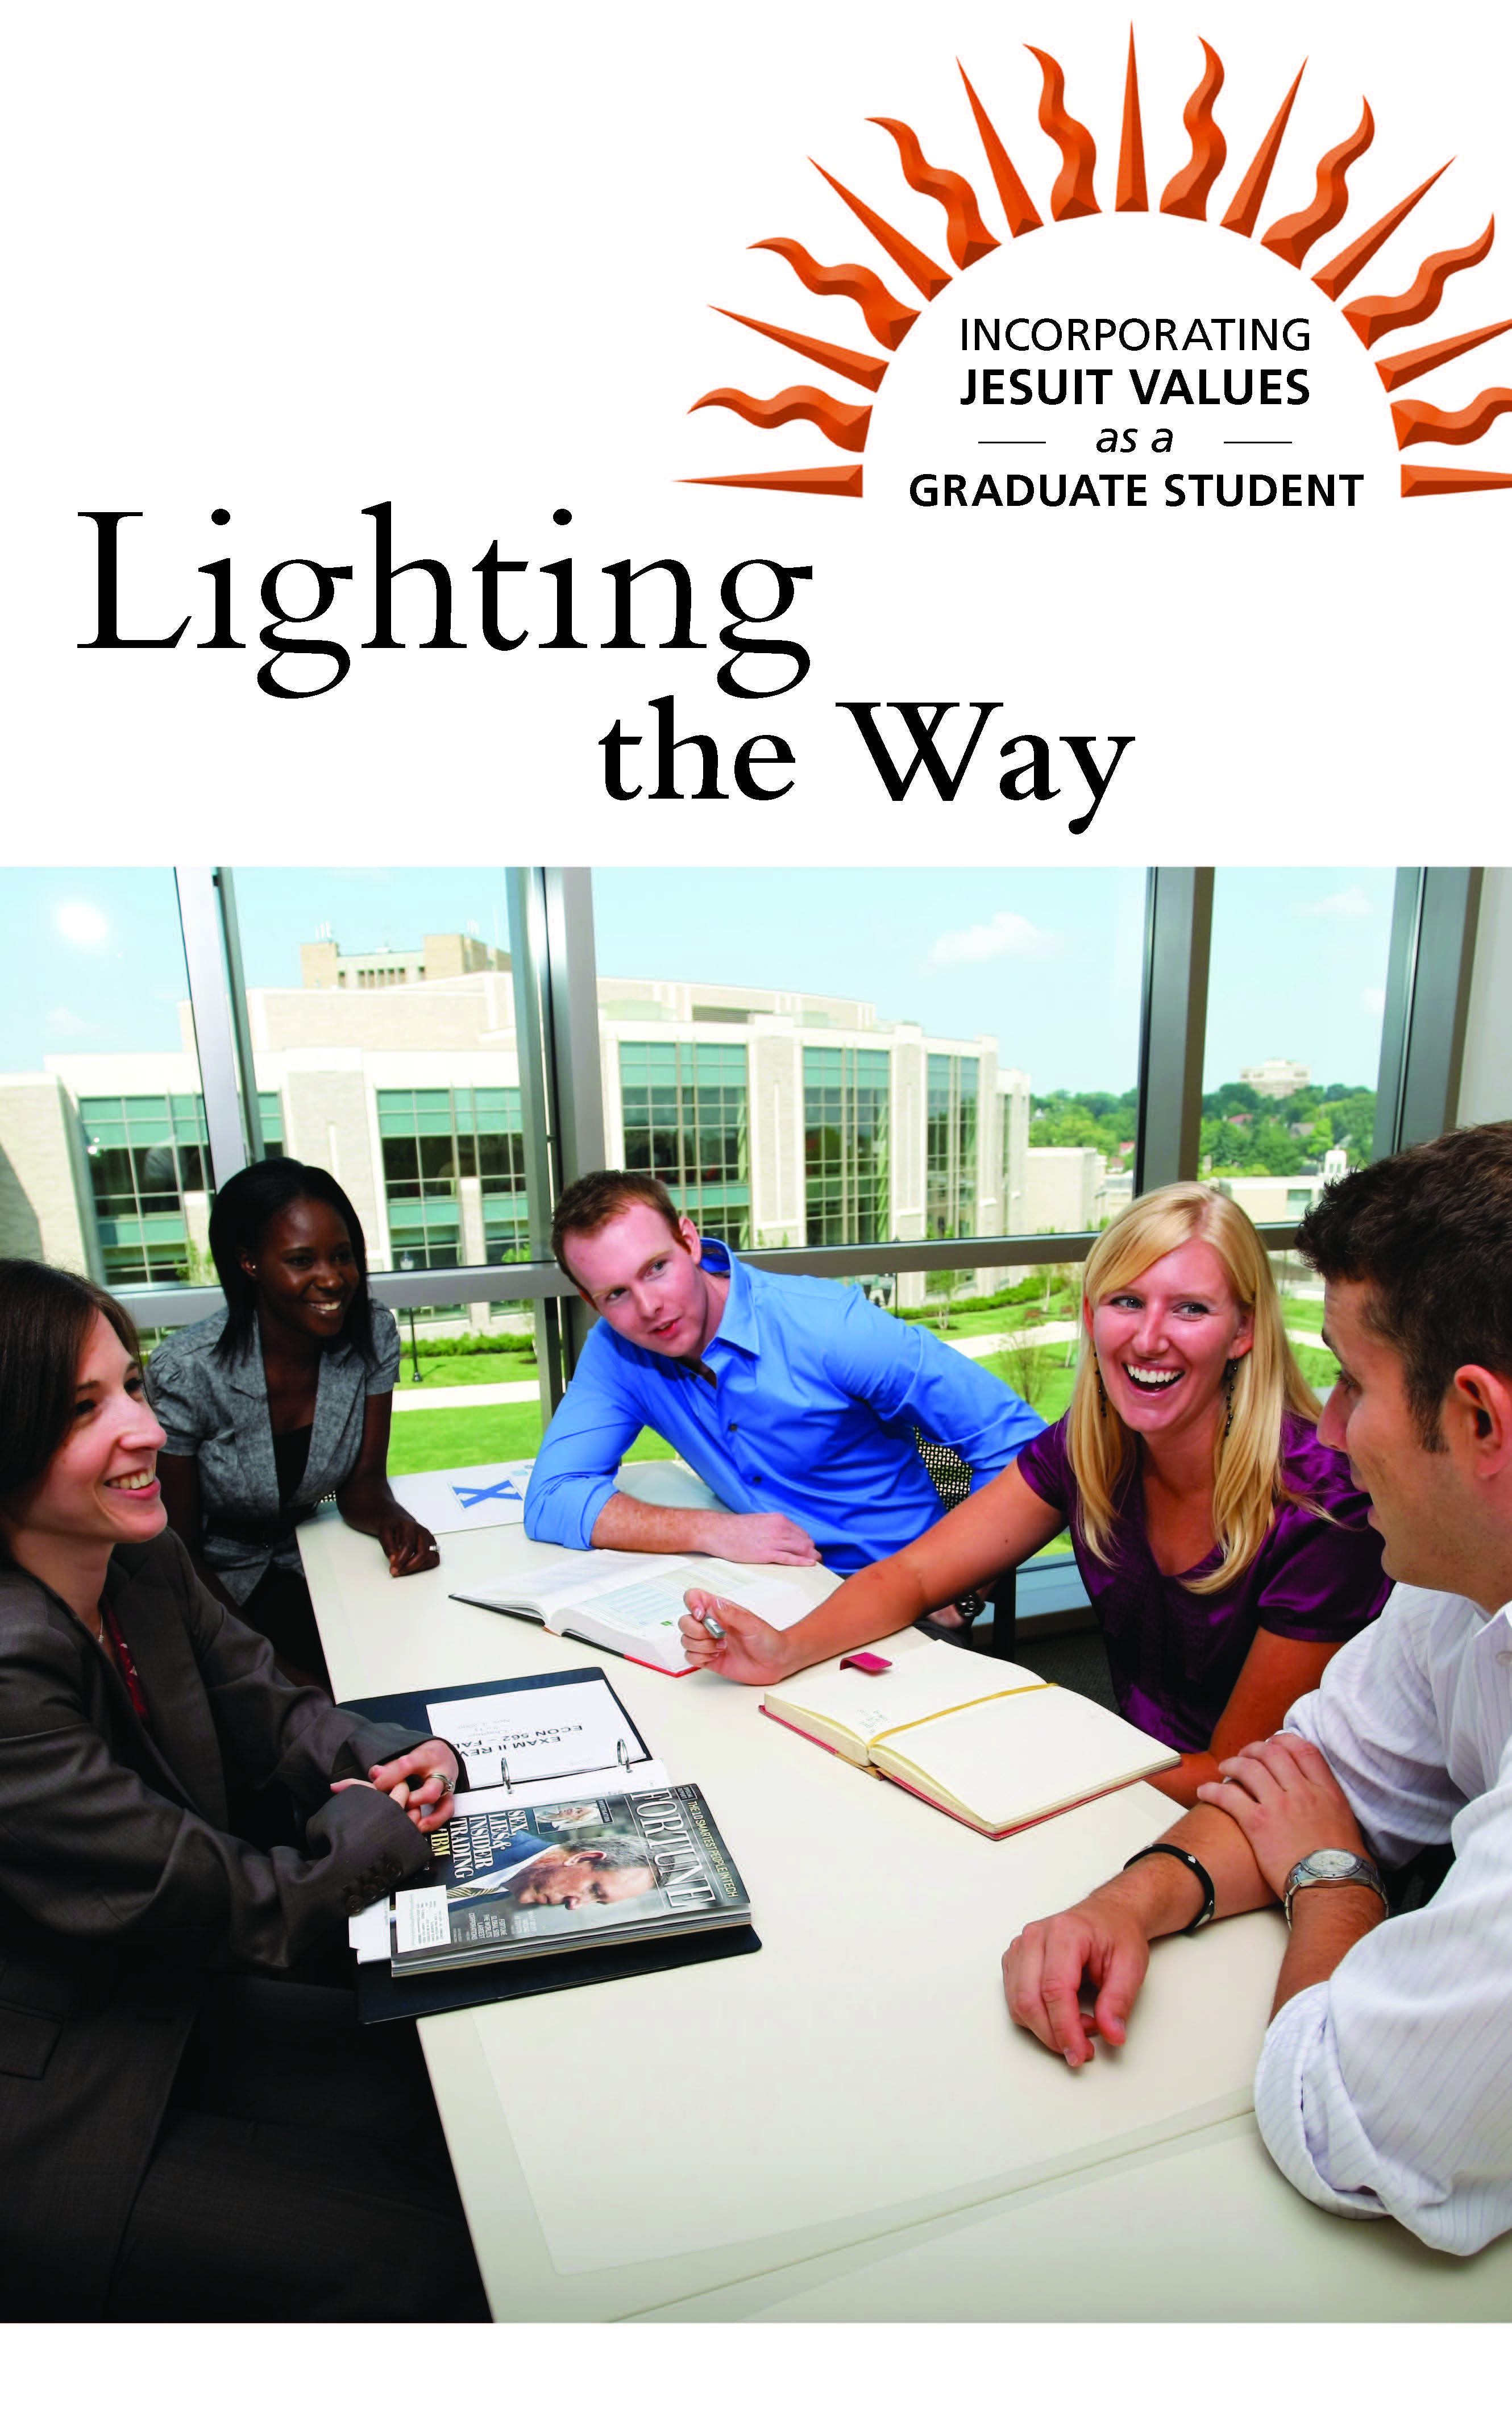 Cover for "Lighting the Way for Graduate Students" publication